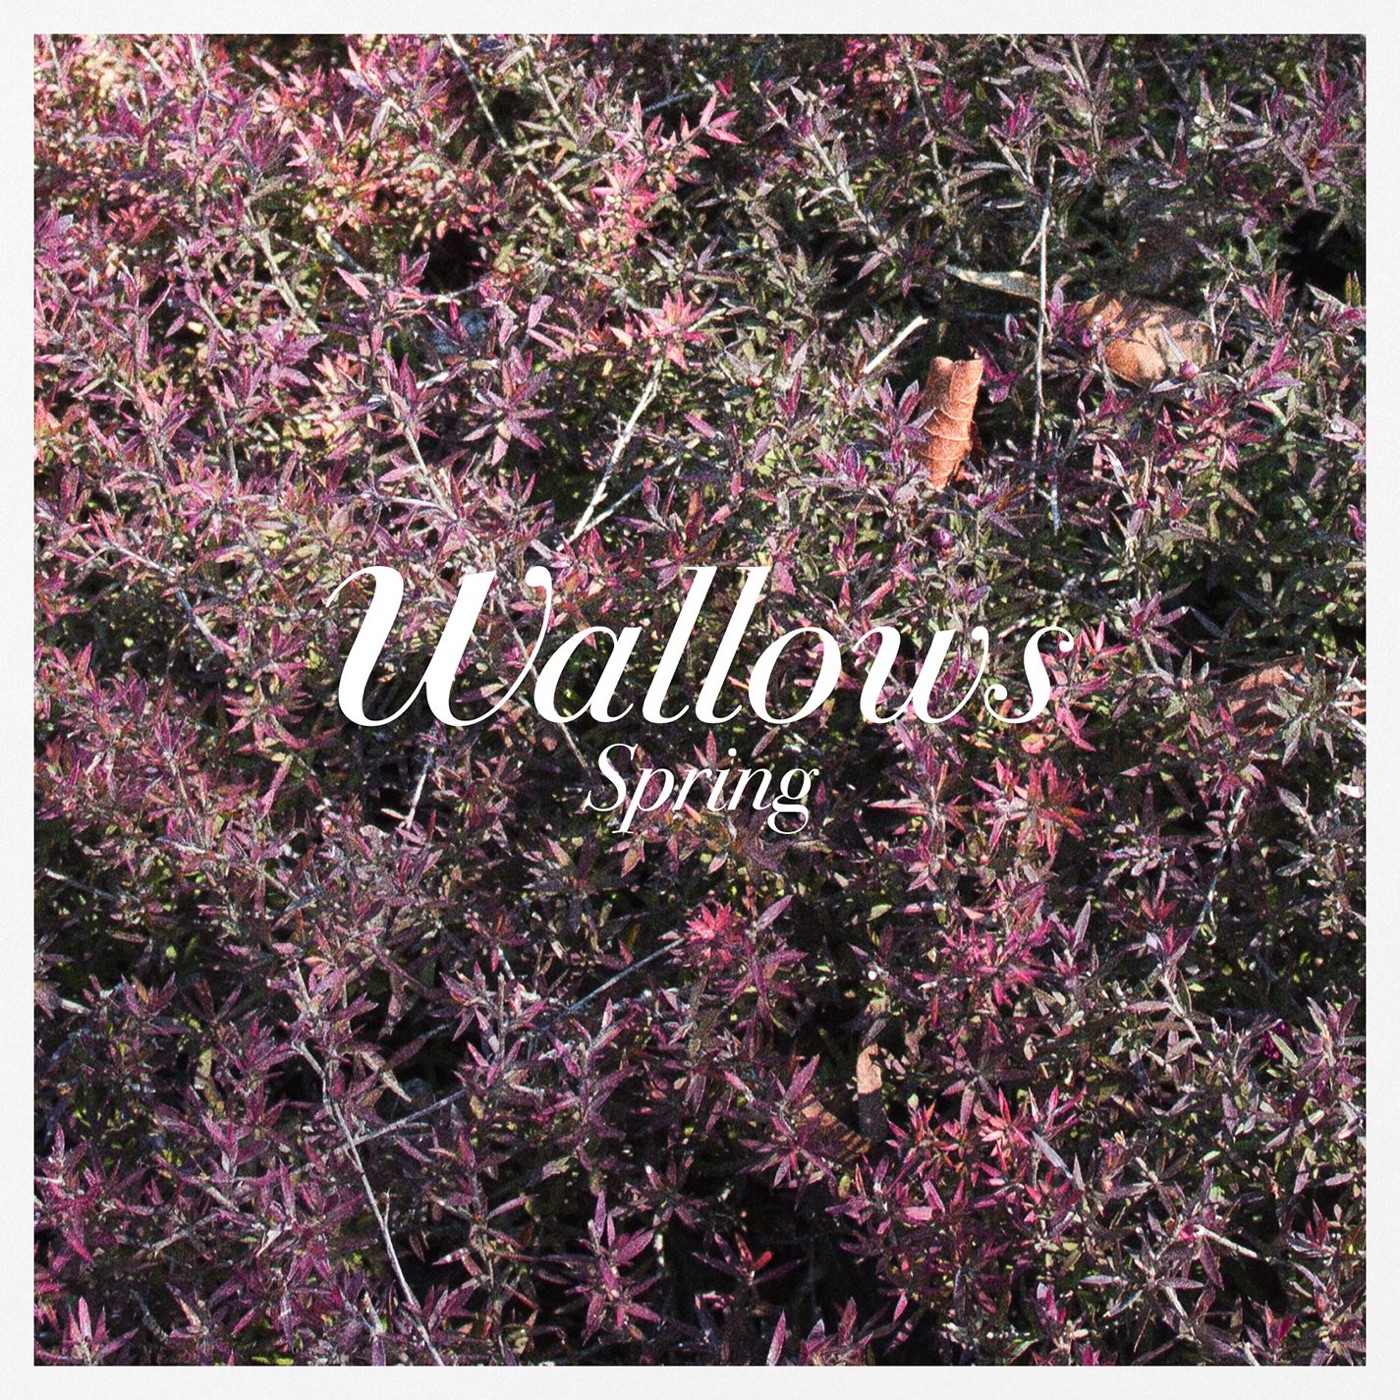 Spring EP by Wallows